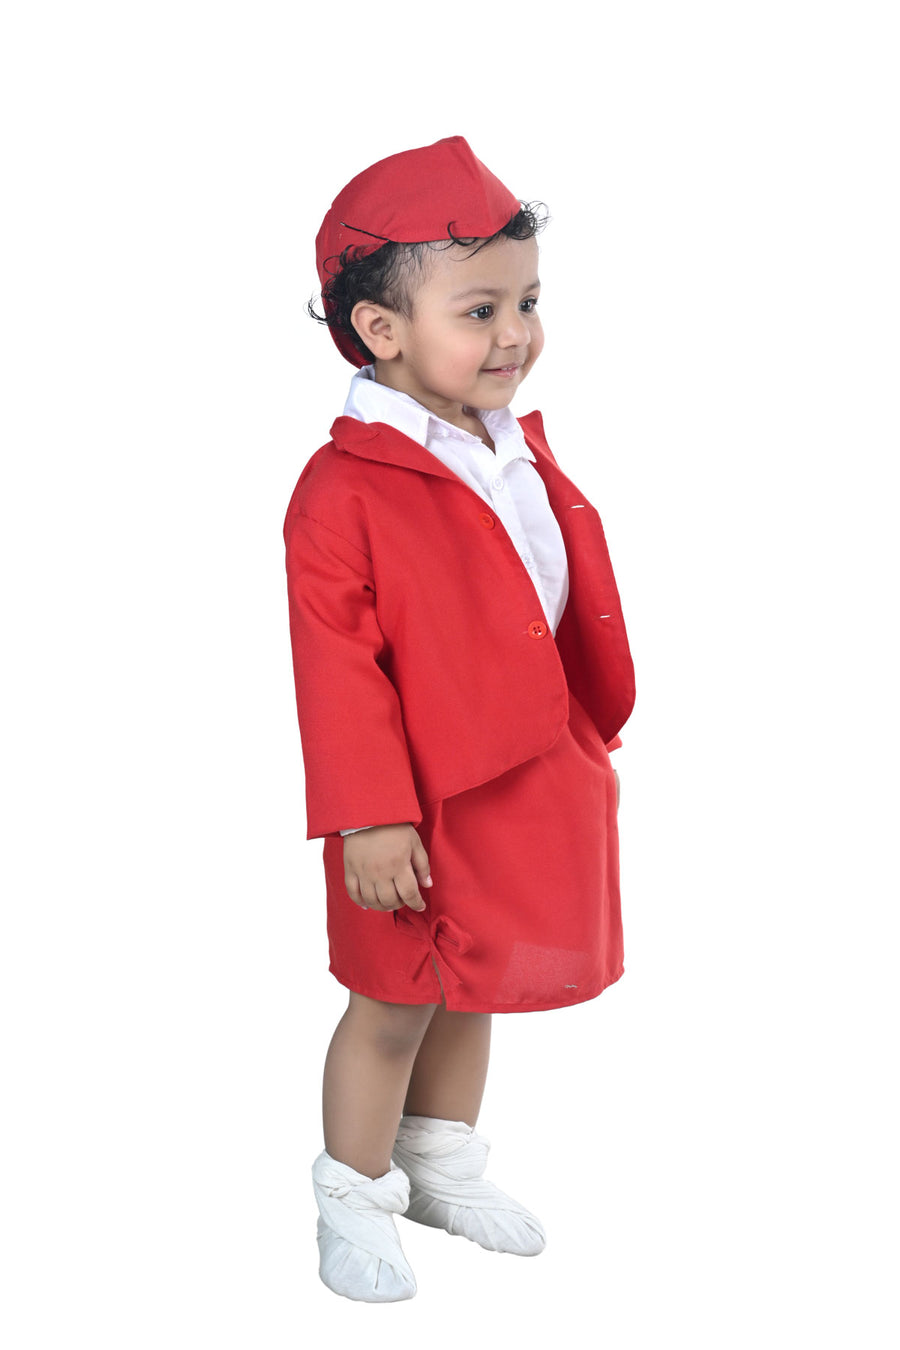 Airline Air Hostess Kids Fancy Dress Costume for Girls - Red